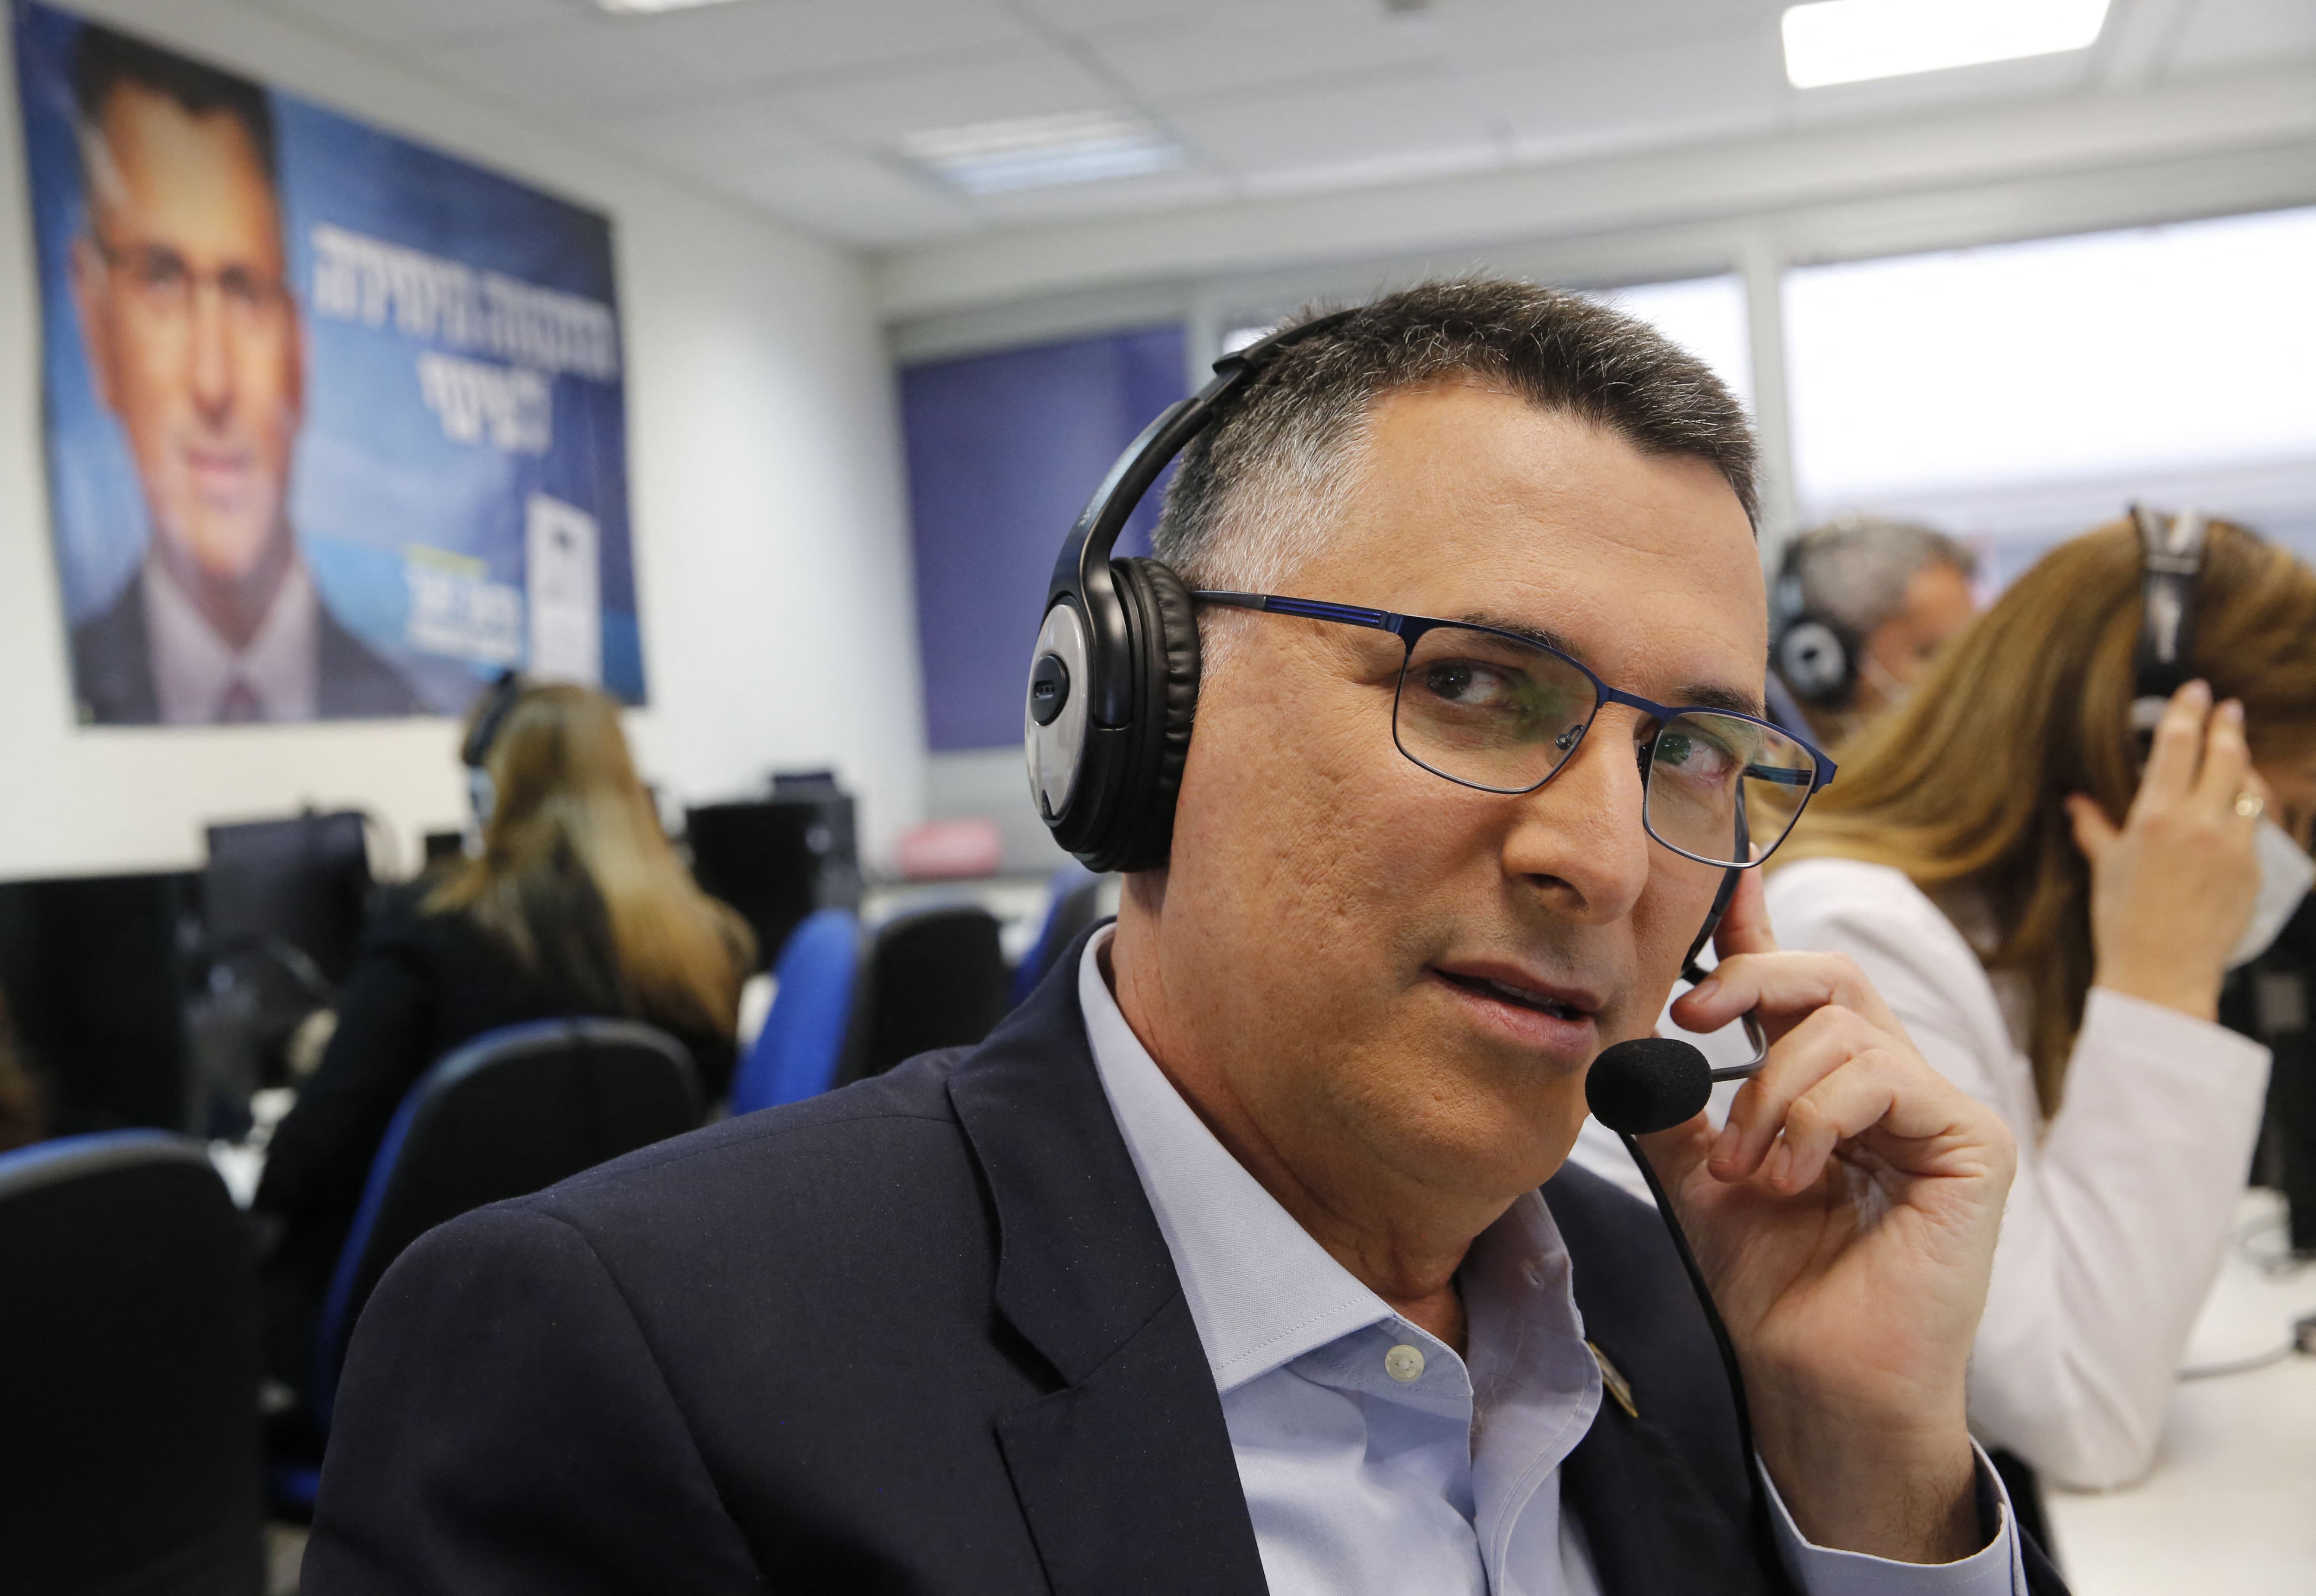 Gideon Saar, head of Israel's New Hope party, works at the party's headquarters in the Israeli coastal city of Tel Aviv on March 22, 2021, a day ahead of the election. (AFP)